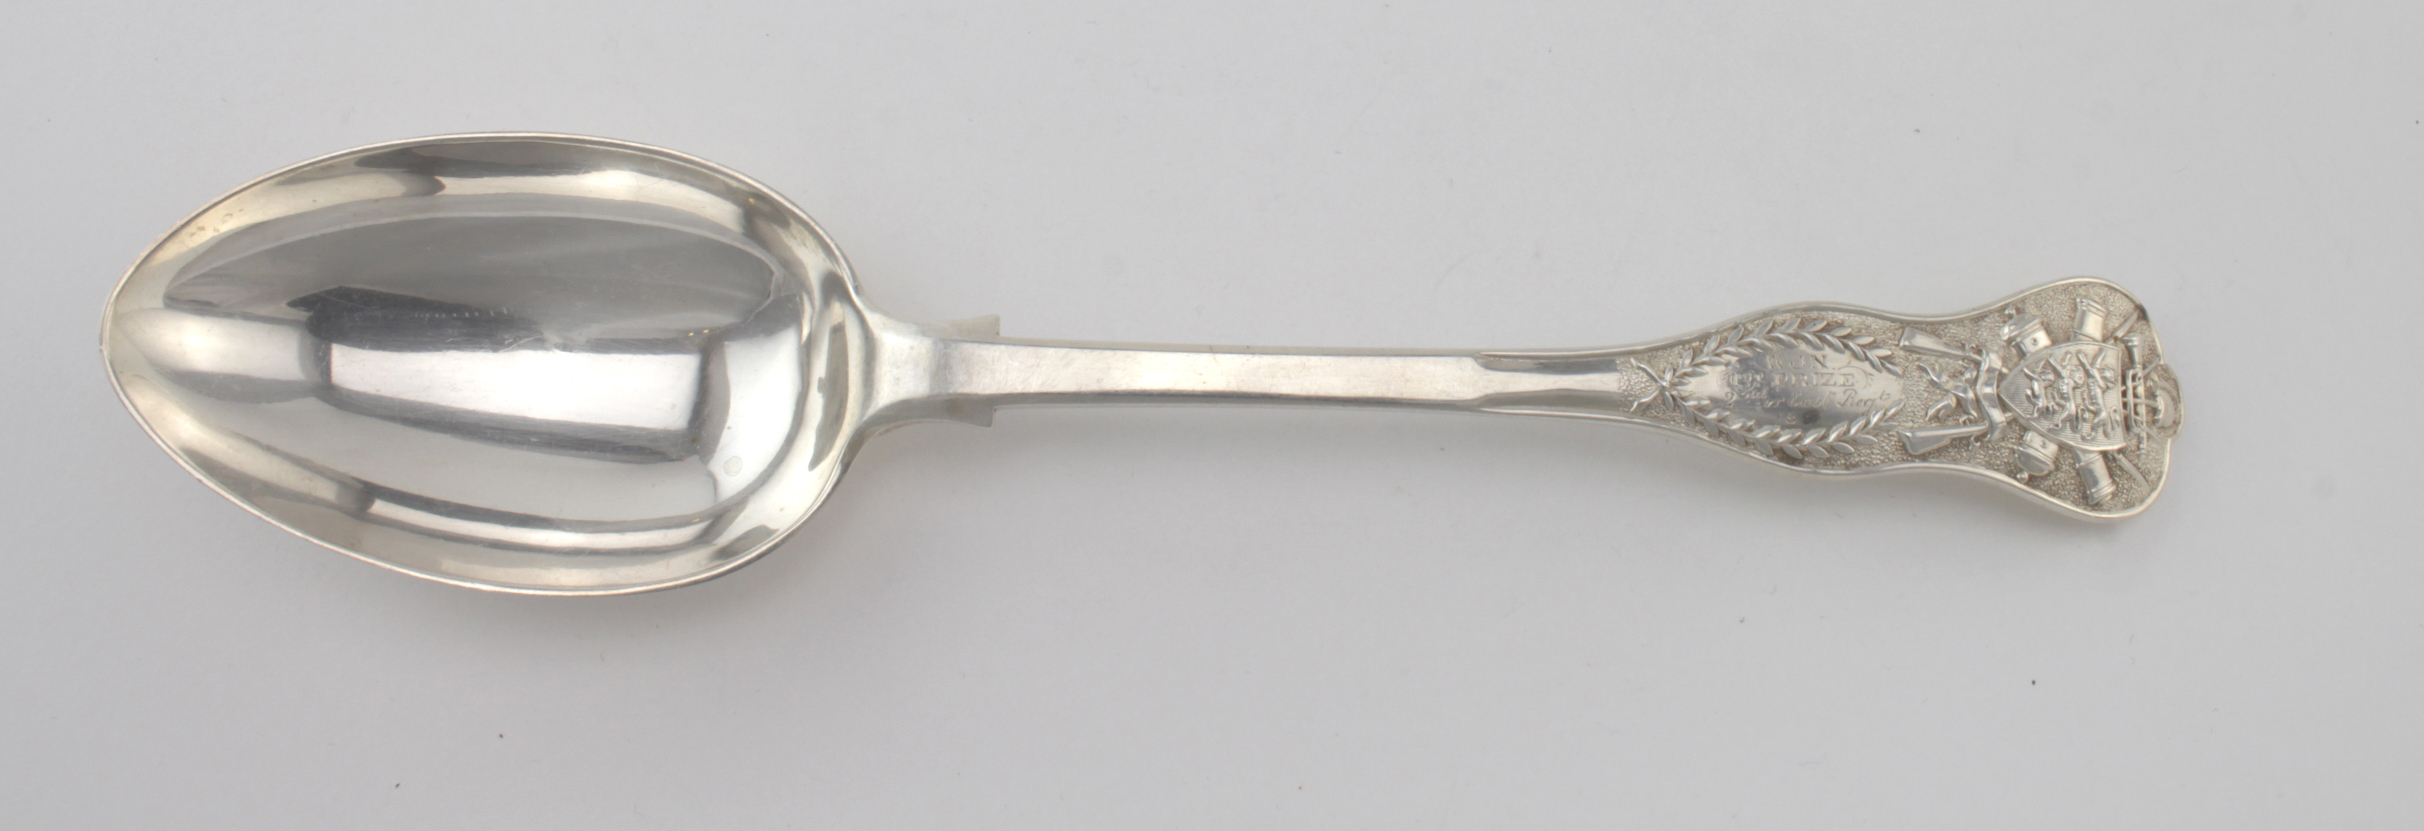 Jersey Militia silver shooting spoon inscribed "WJN 1st. Prize, 2nd or East Regt. 1891".